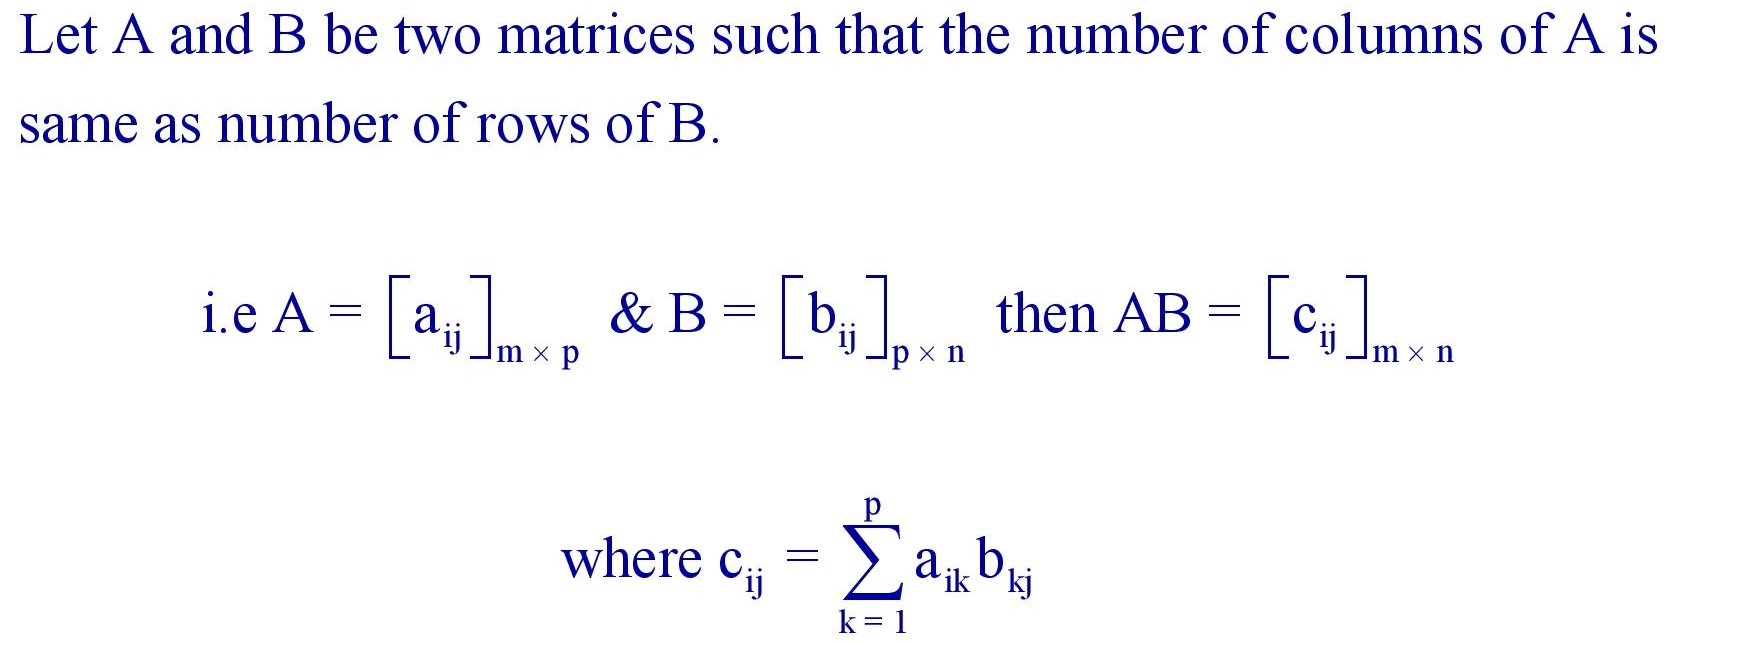 Multiplication of matrices